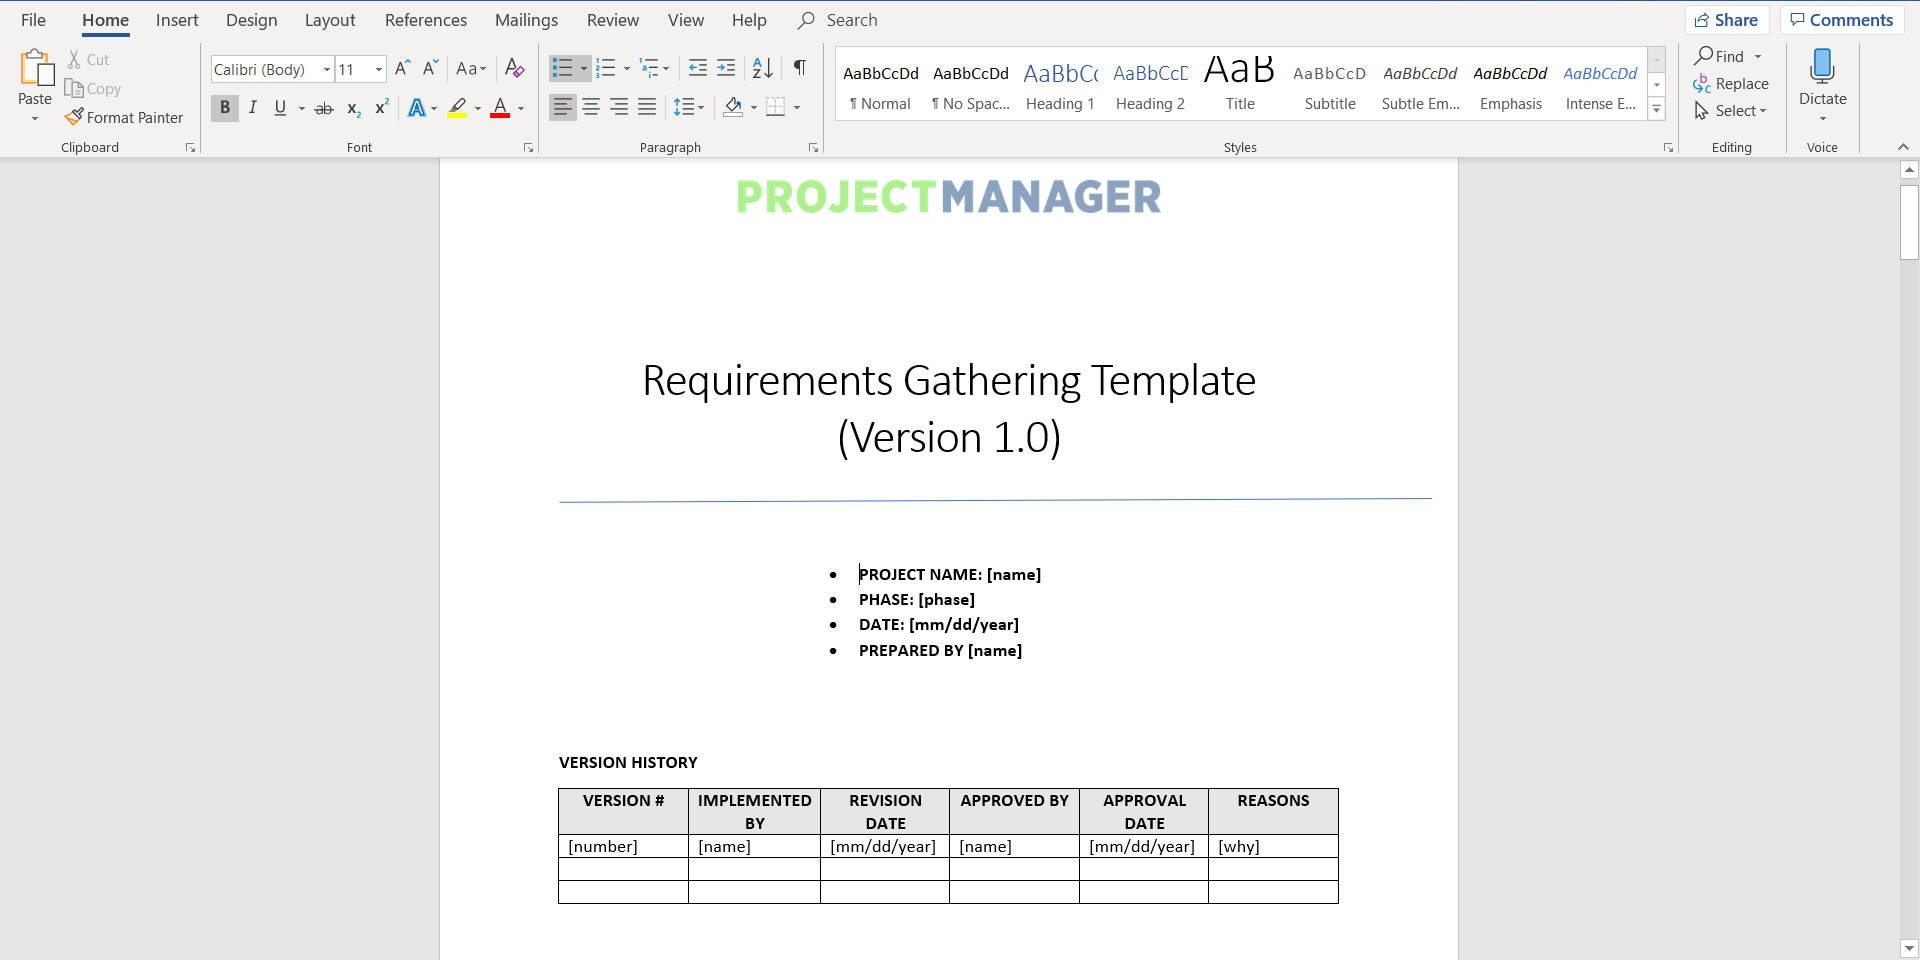 Requirements Gathering Template - ProjectManager Intended For Requirements Gathering Template Checklist